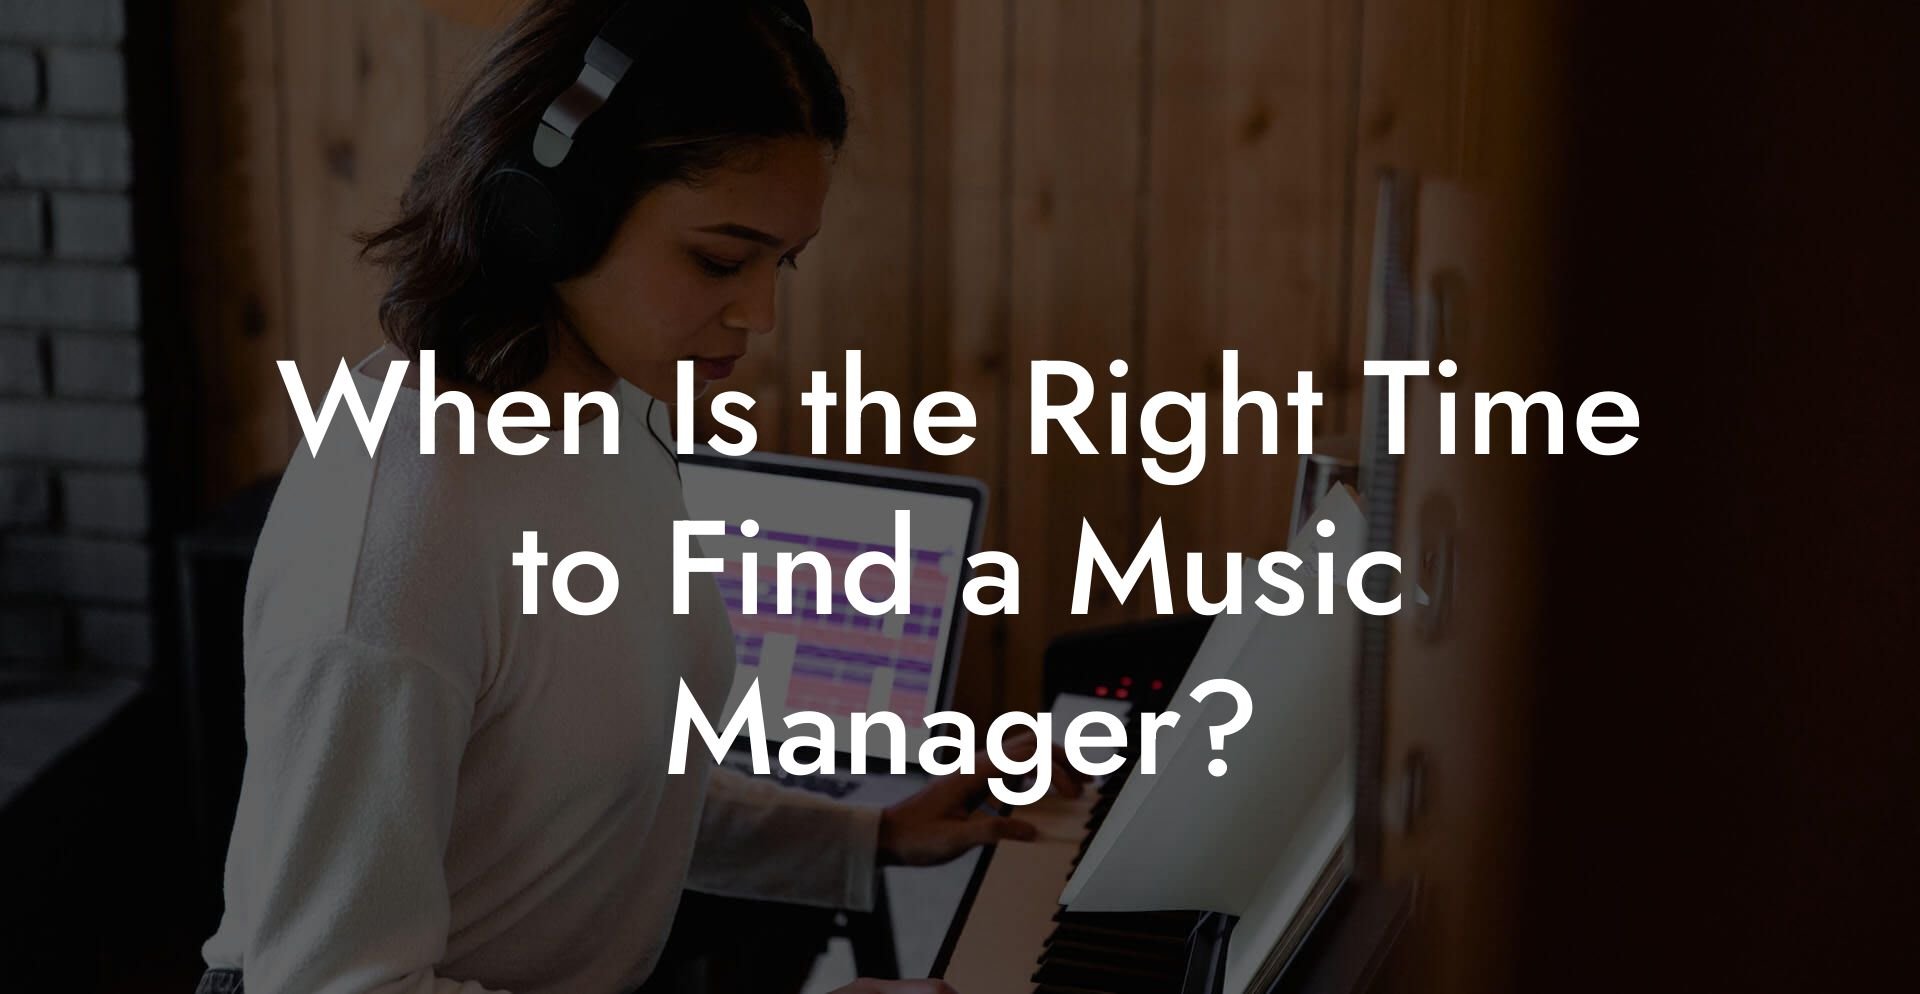 When Is the Right Time to Find a Music Manager?